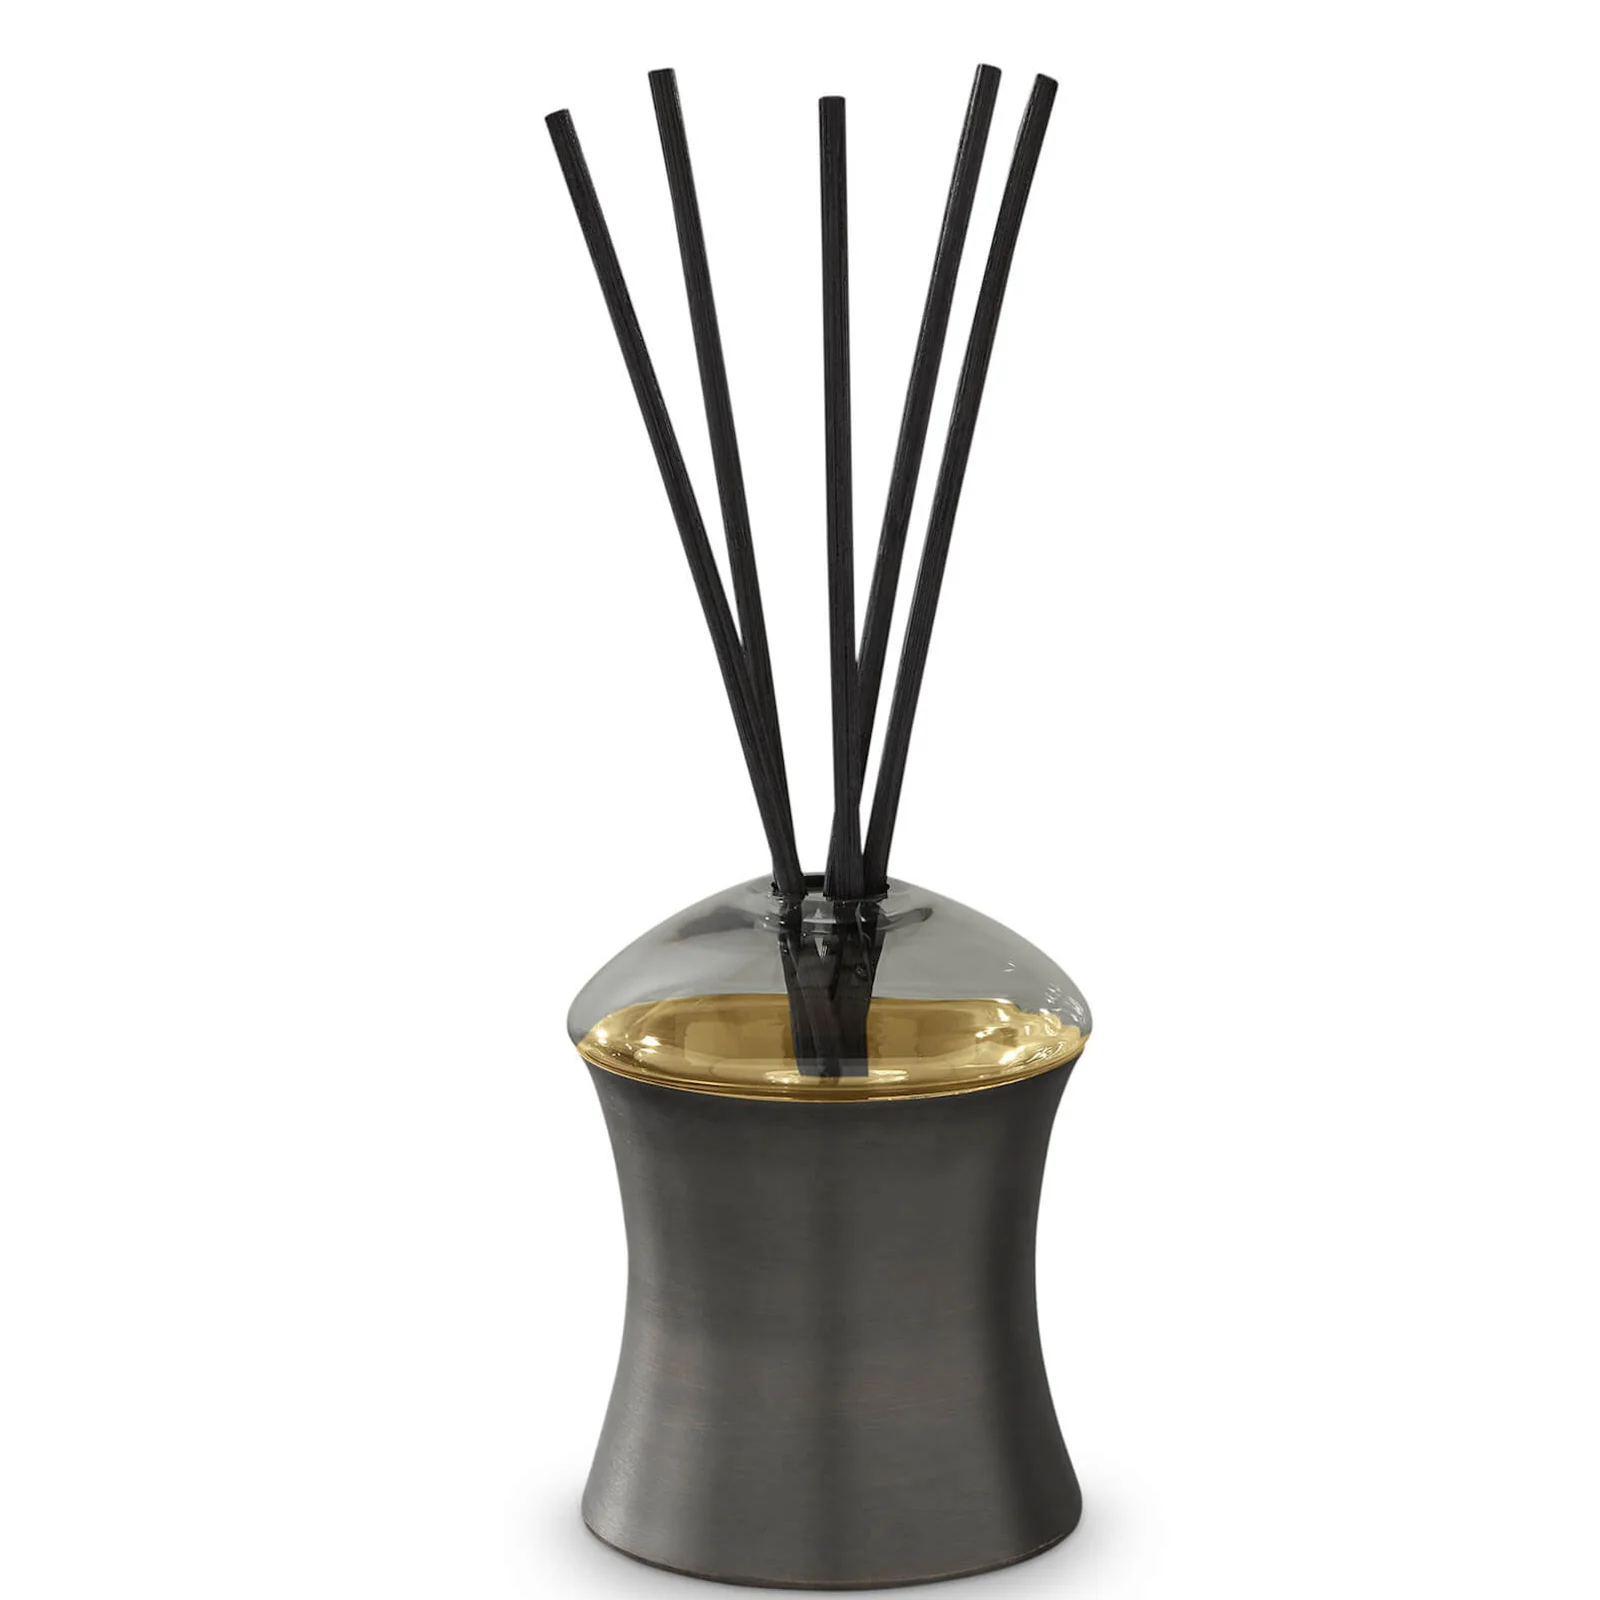 Tom Dixon Scented Eclectic Diffuser - Alchemy Image 1